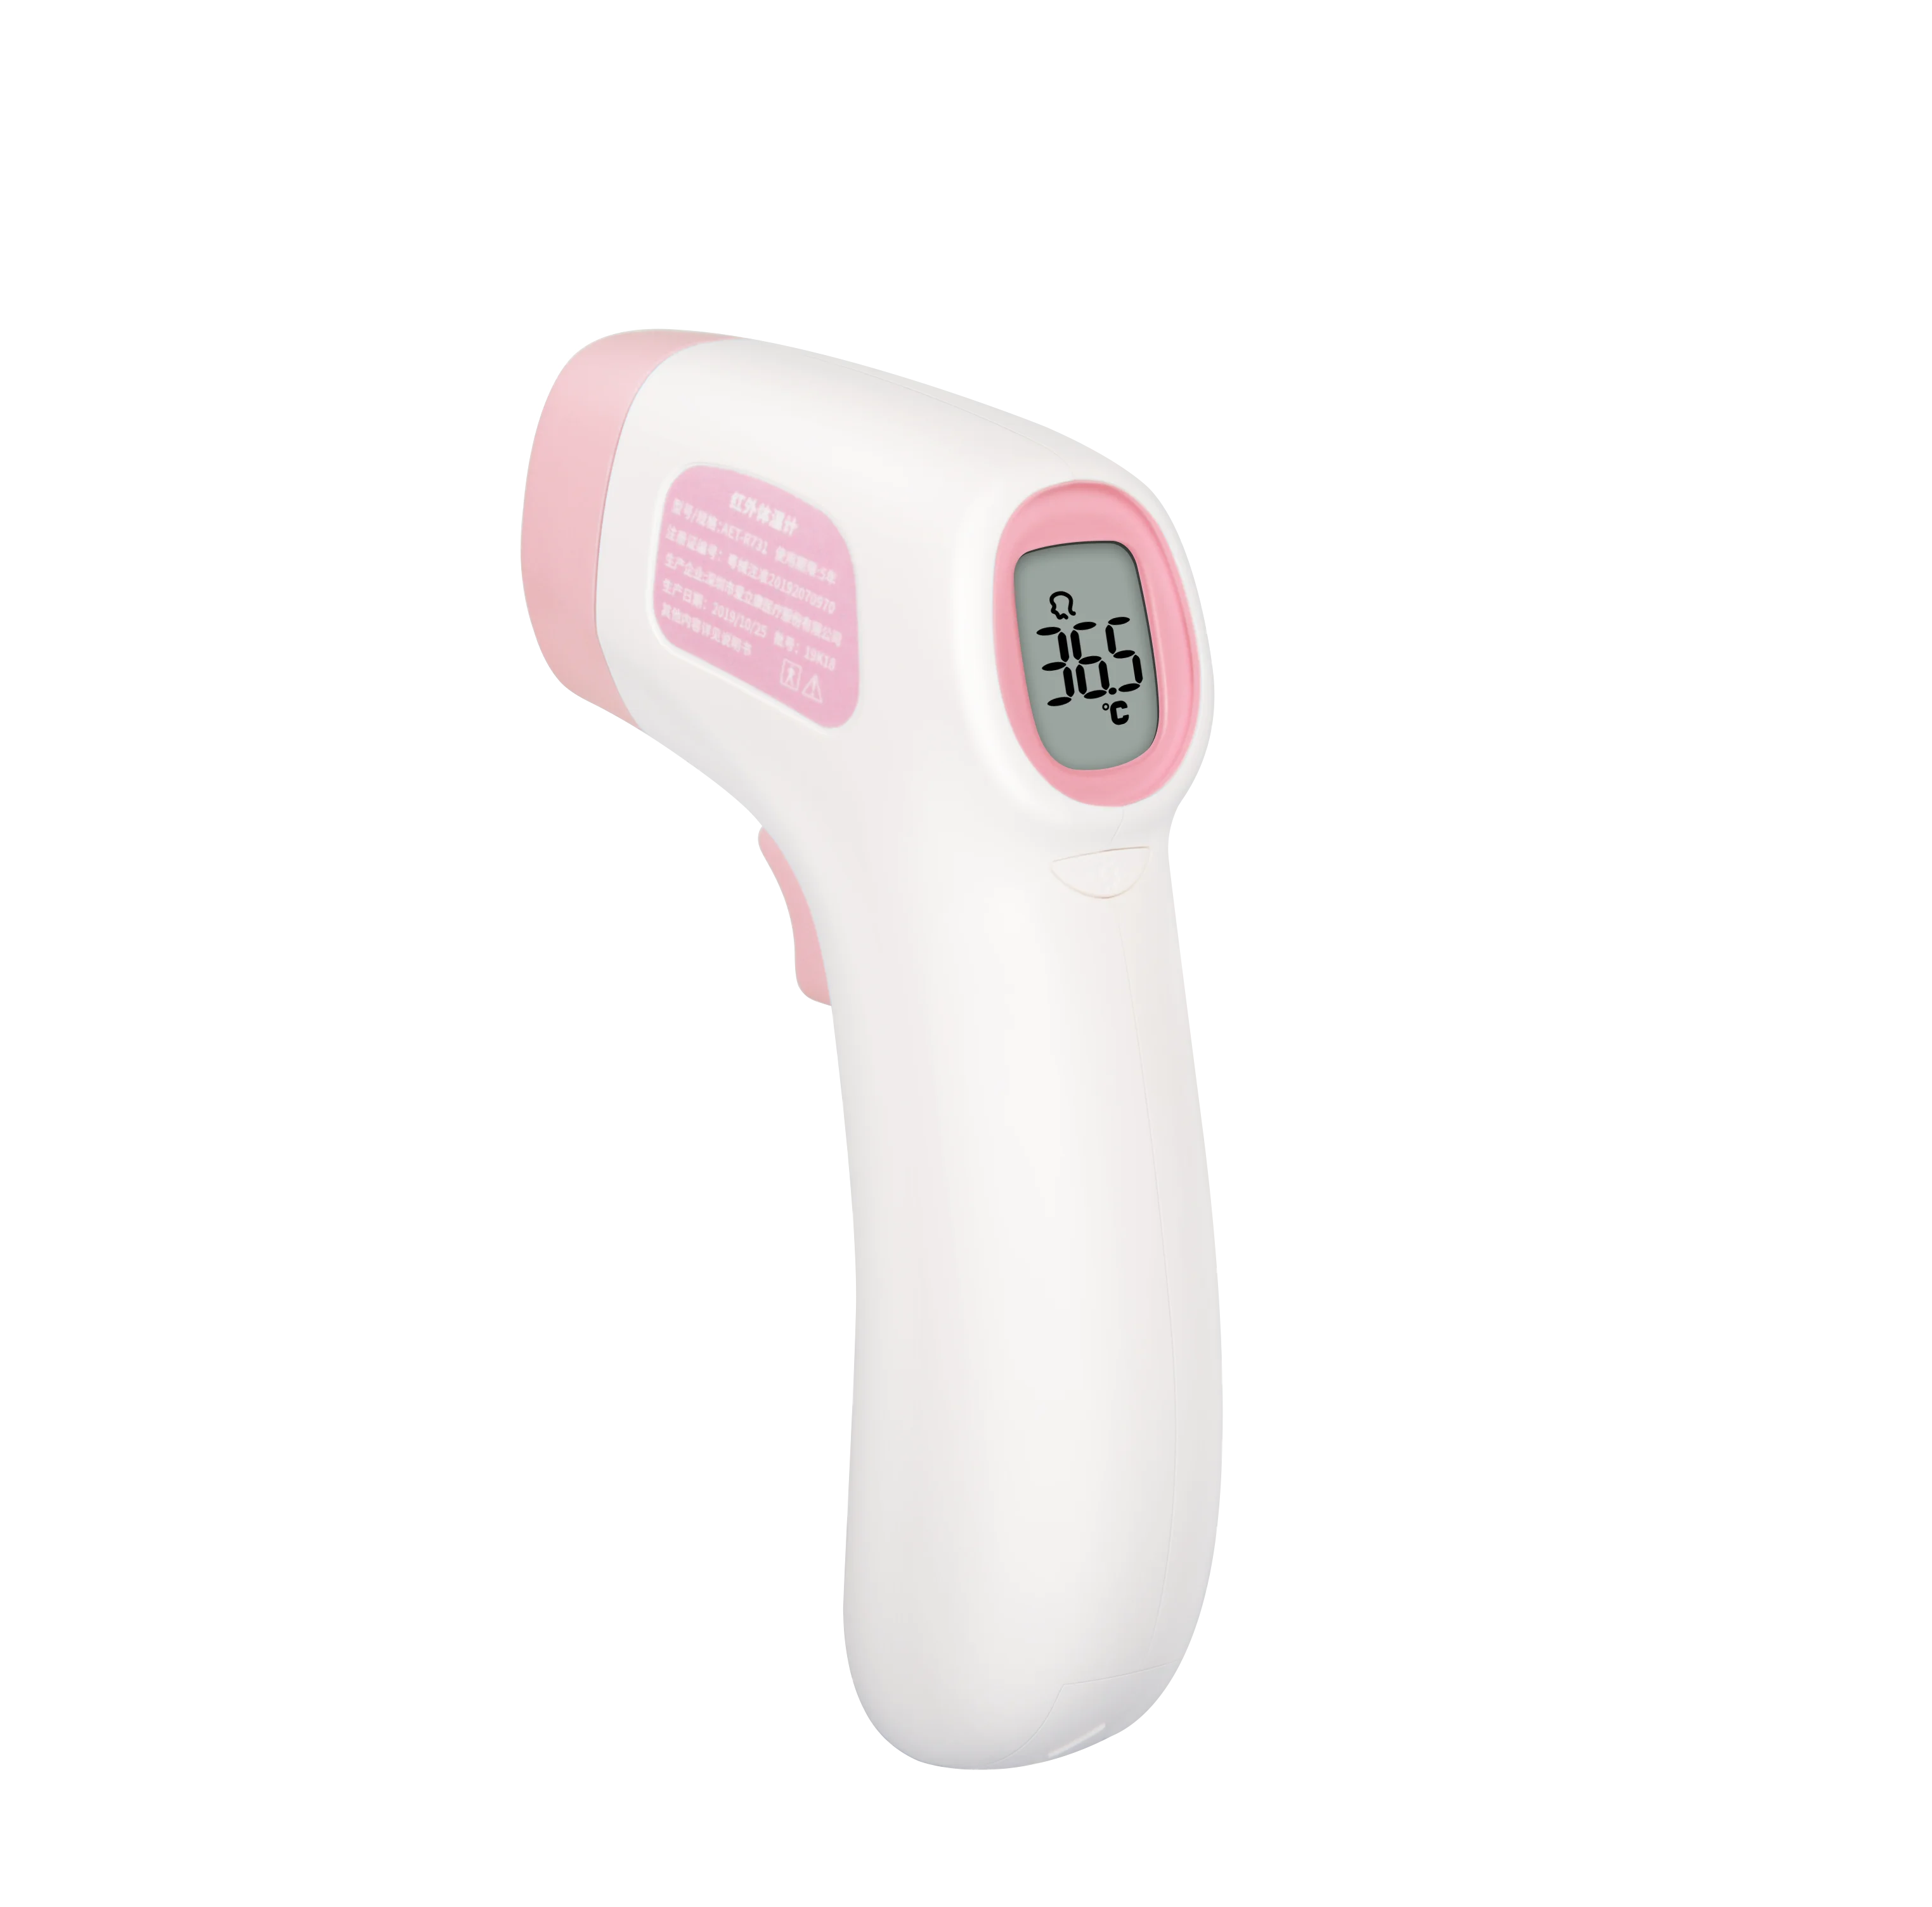 Alicn very hot sale very cheap Infrared Forehead / Electronic Thermometer